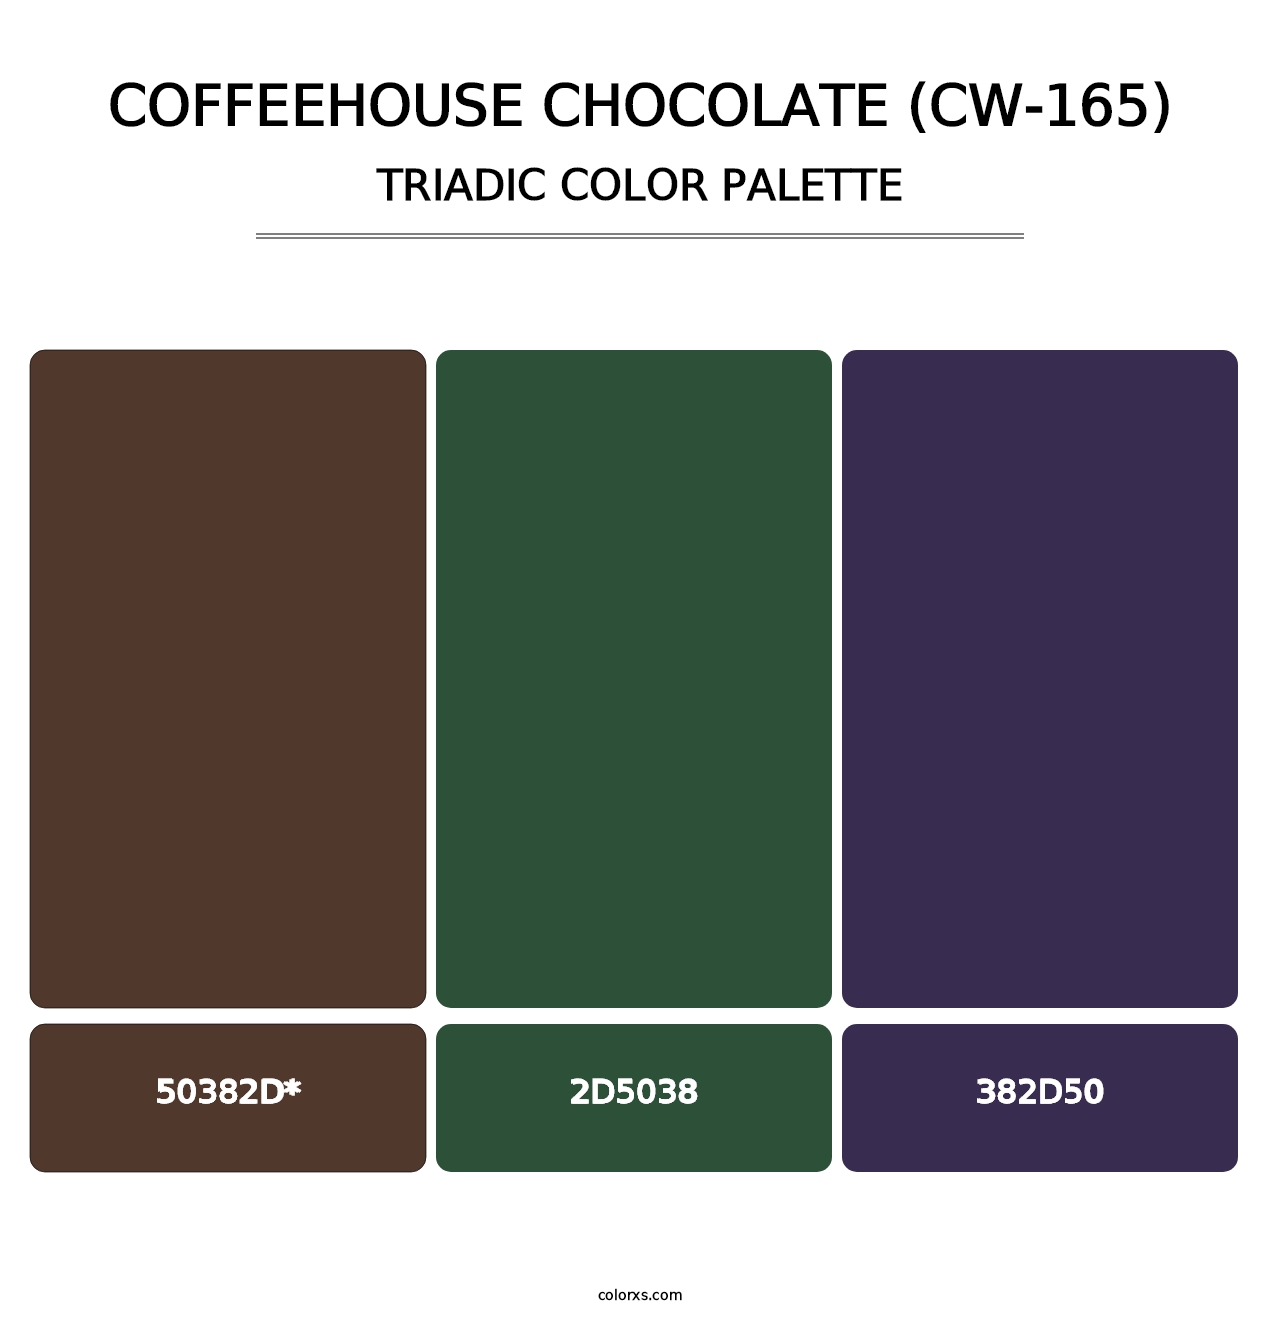 Coffeehouse Chocolate (CW-165) - Triadic Color Palette